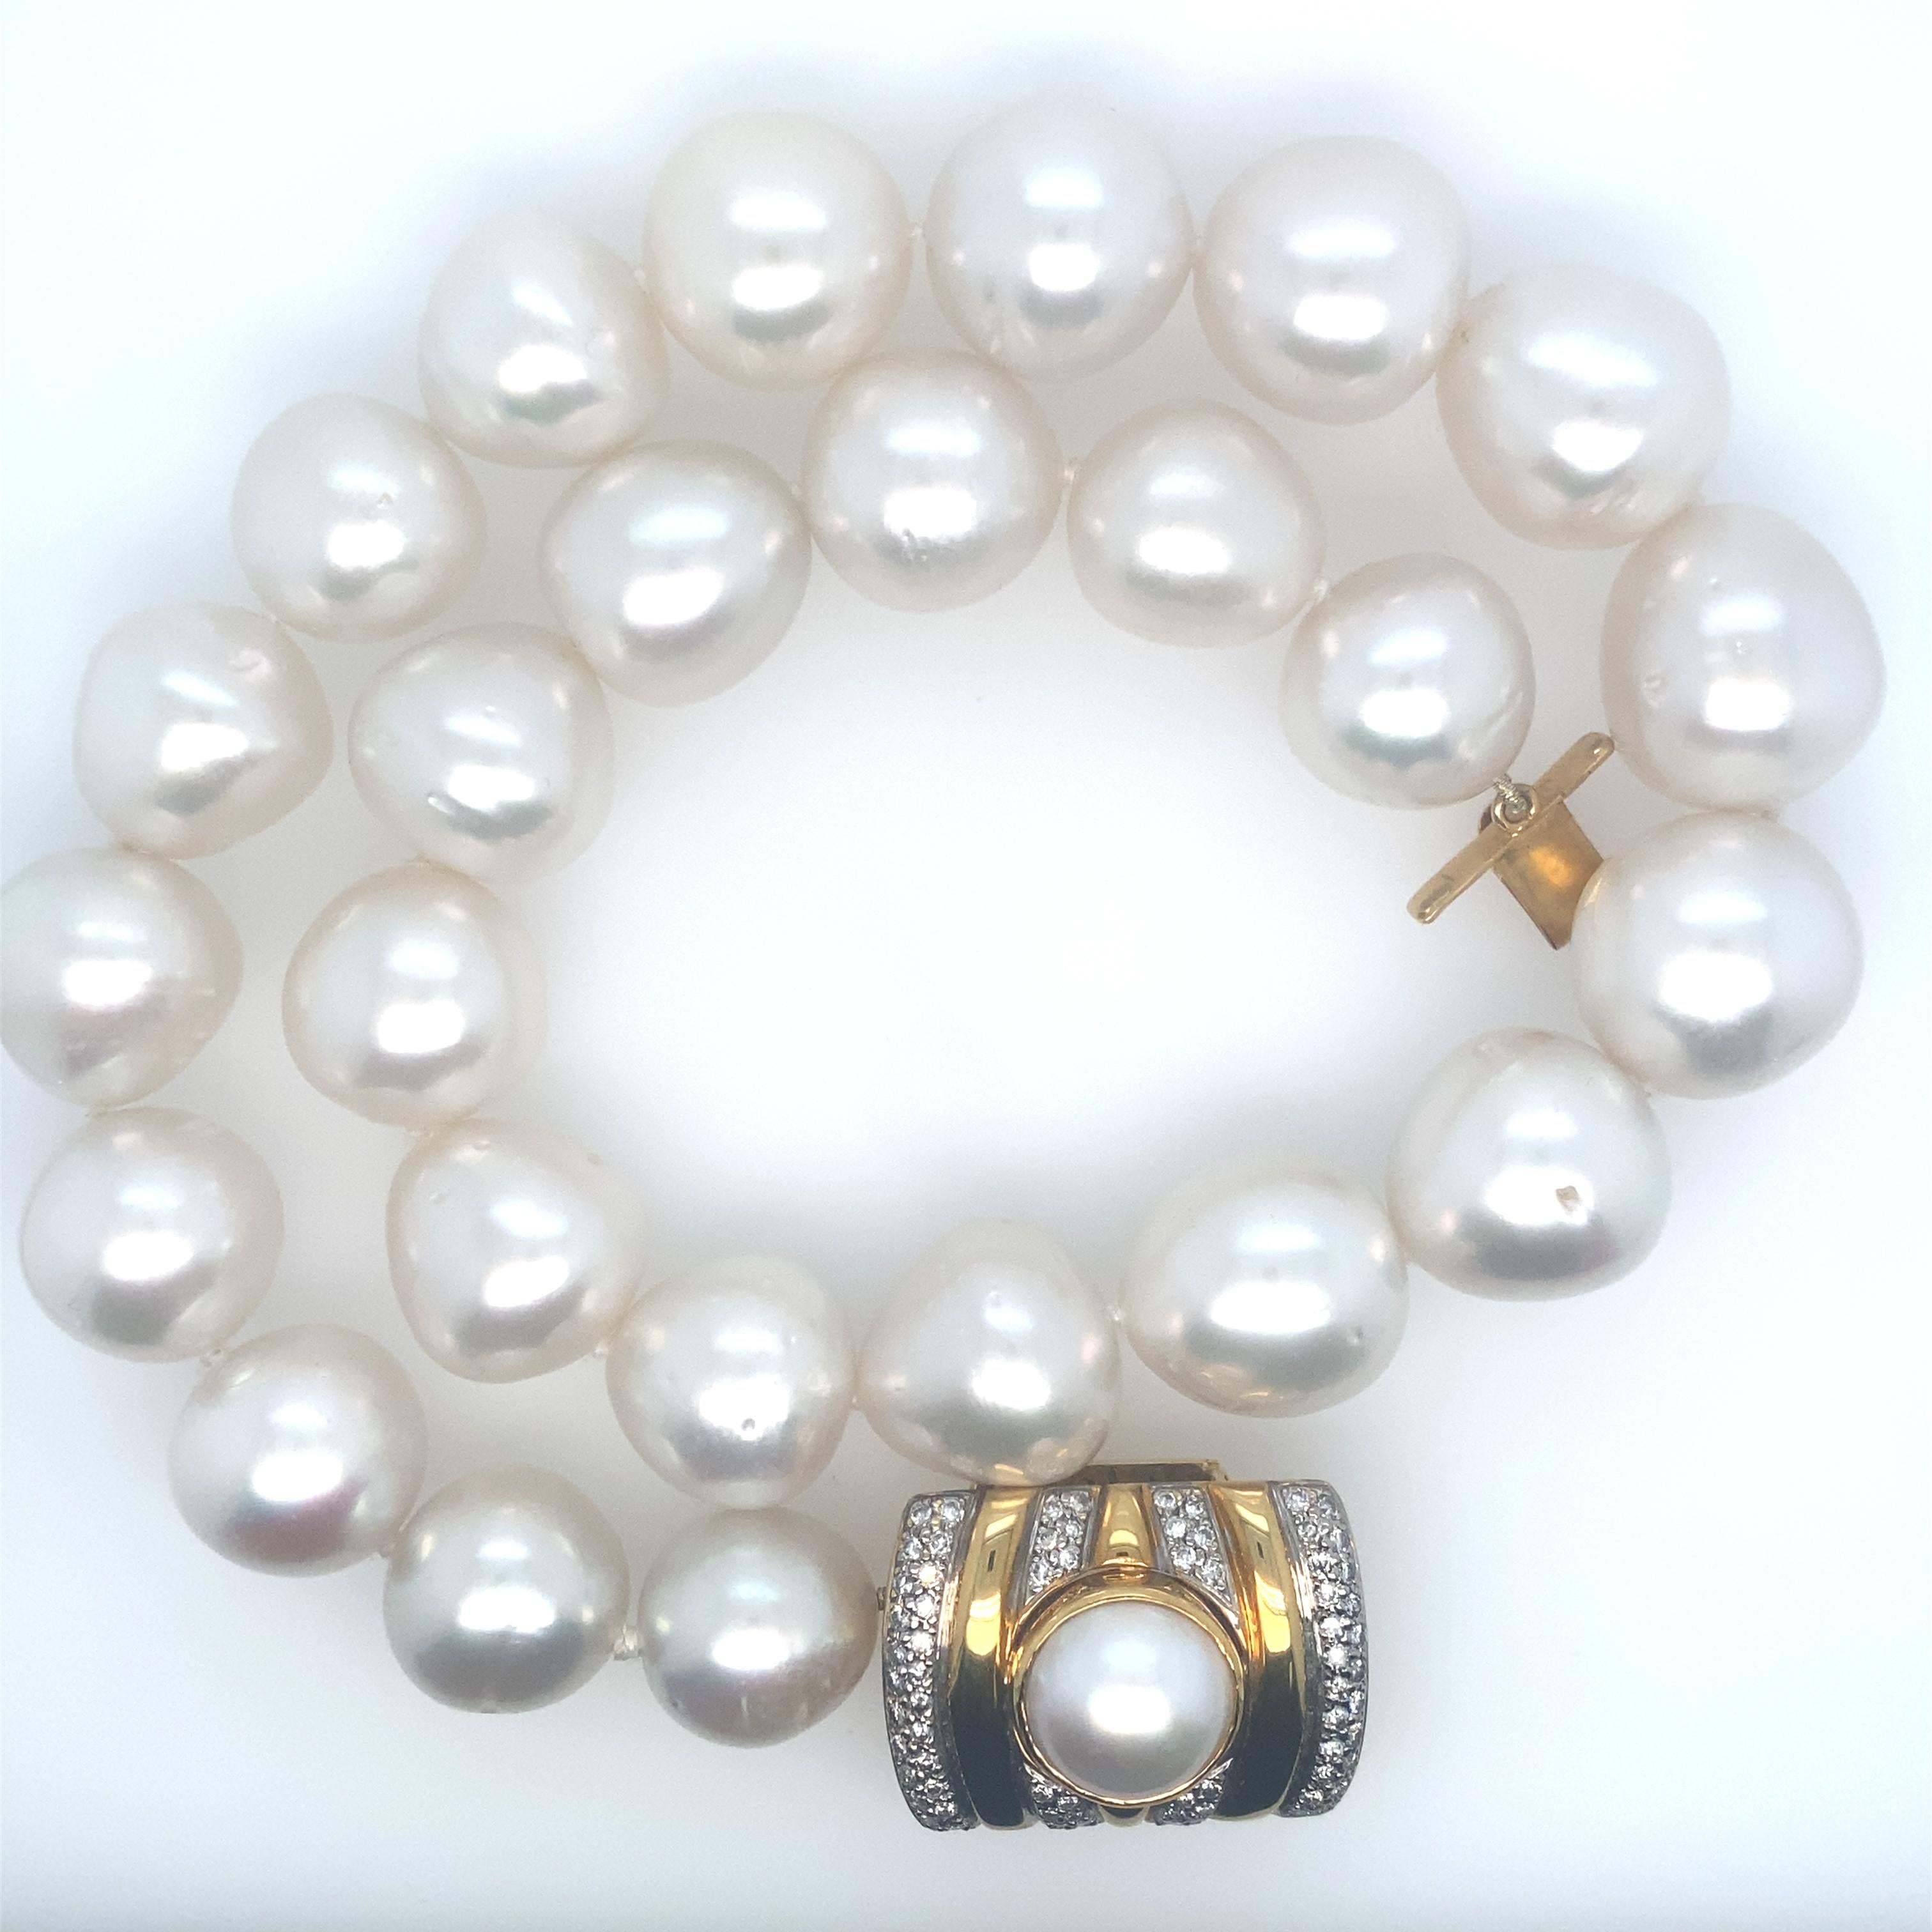 Modern Floral Diamond Clasp/Enhancer with Large South Sea Pearls